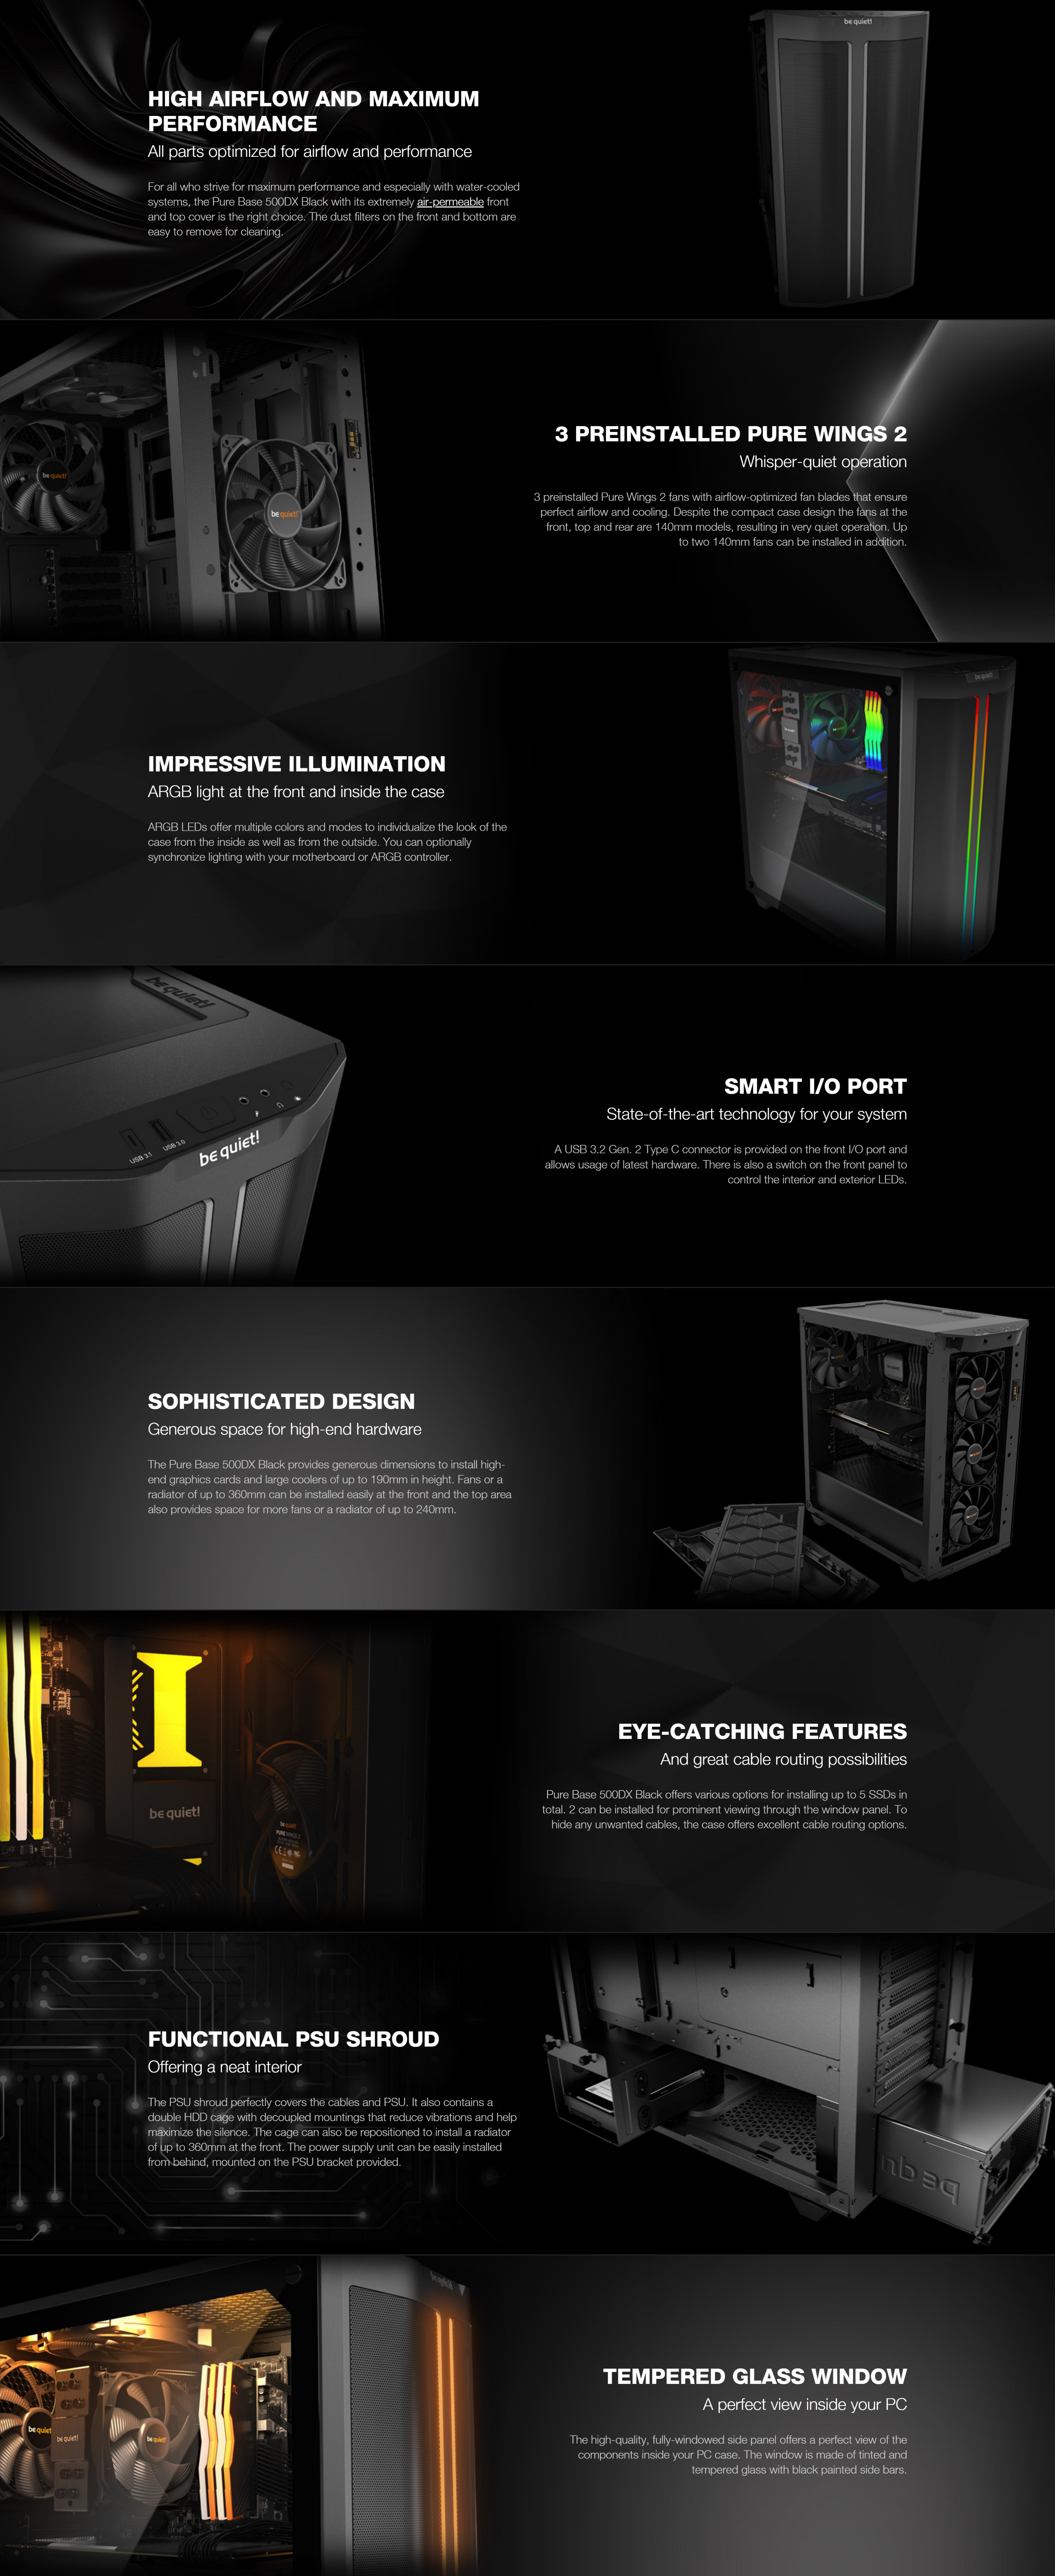 A large marketing image providing additional information about the product be quiet! PURE BASE 500DX TG Mid Tower Case - Black - Additional alt info not provided